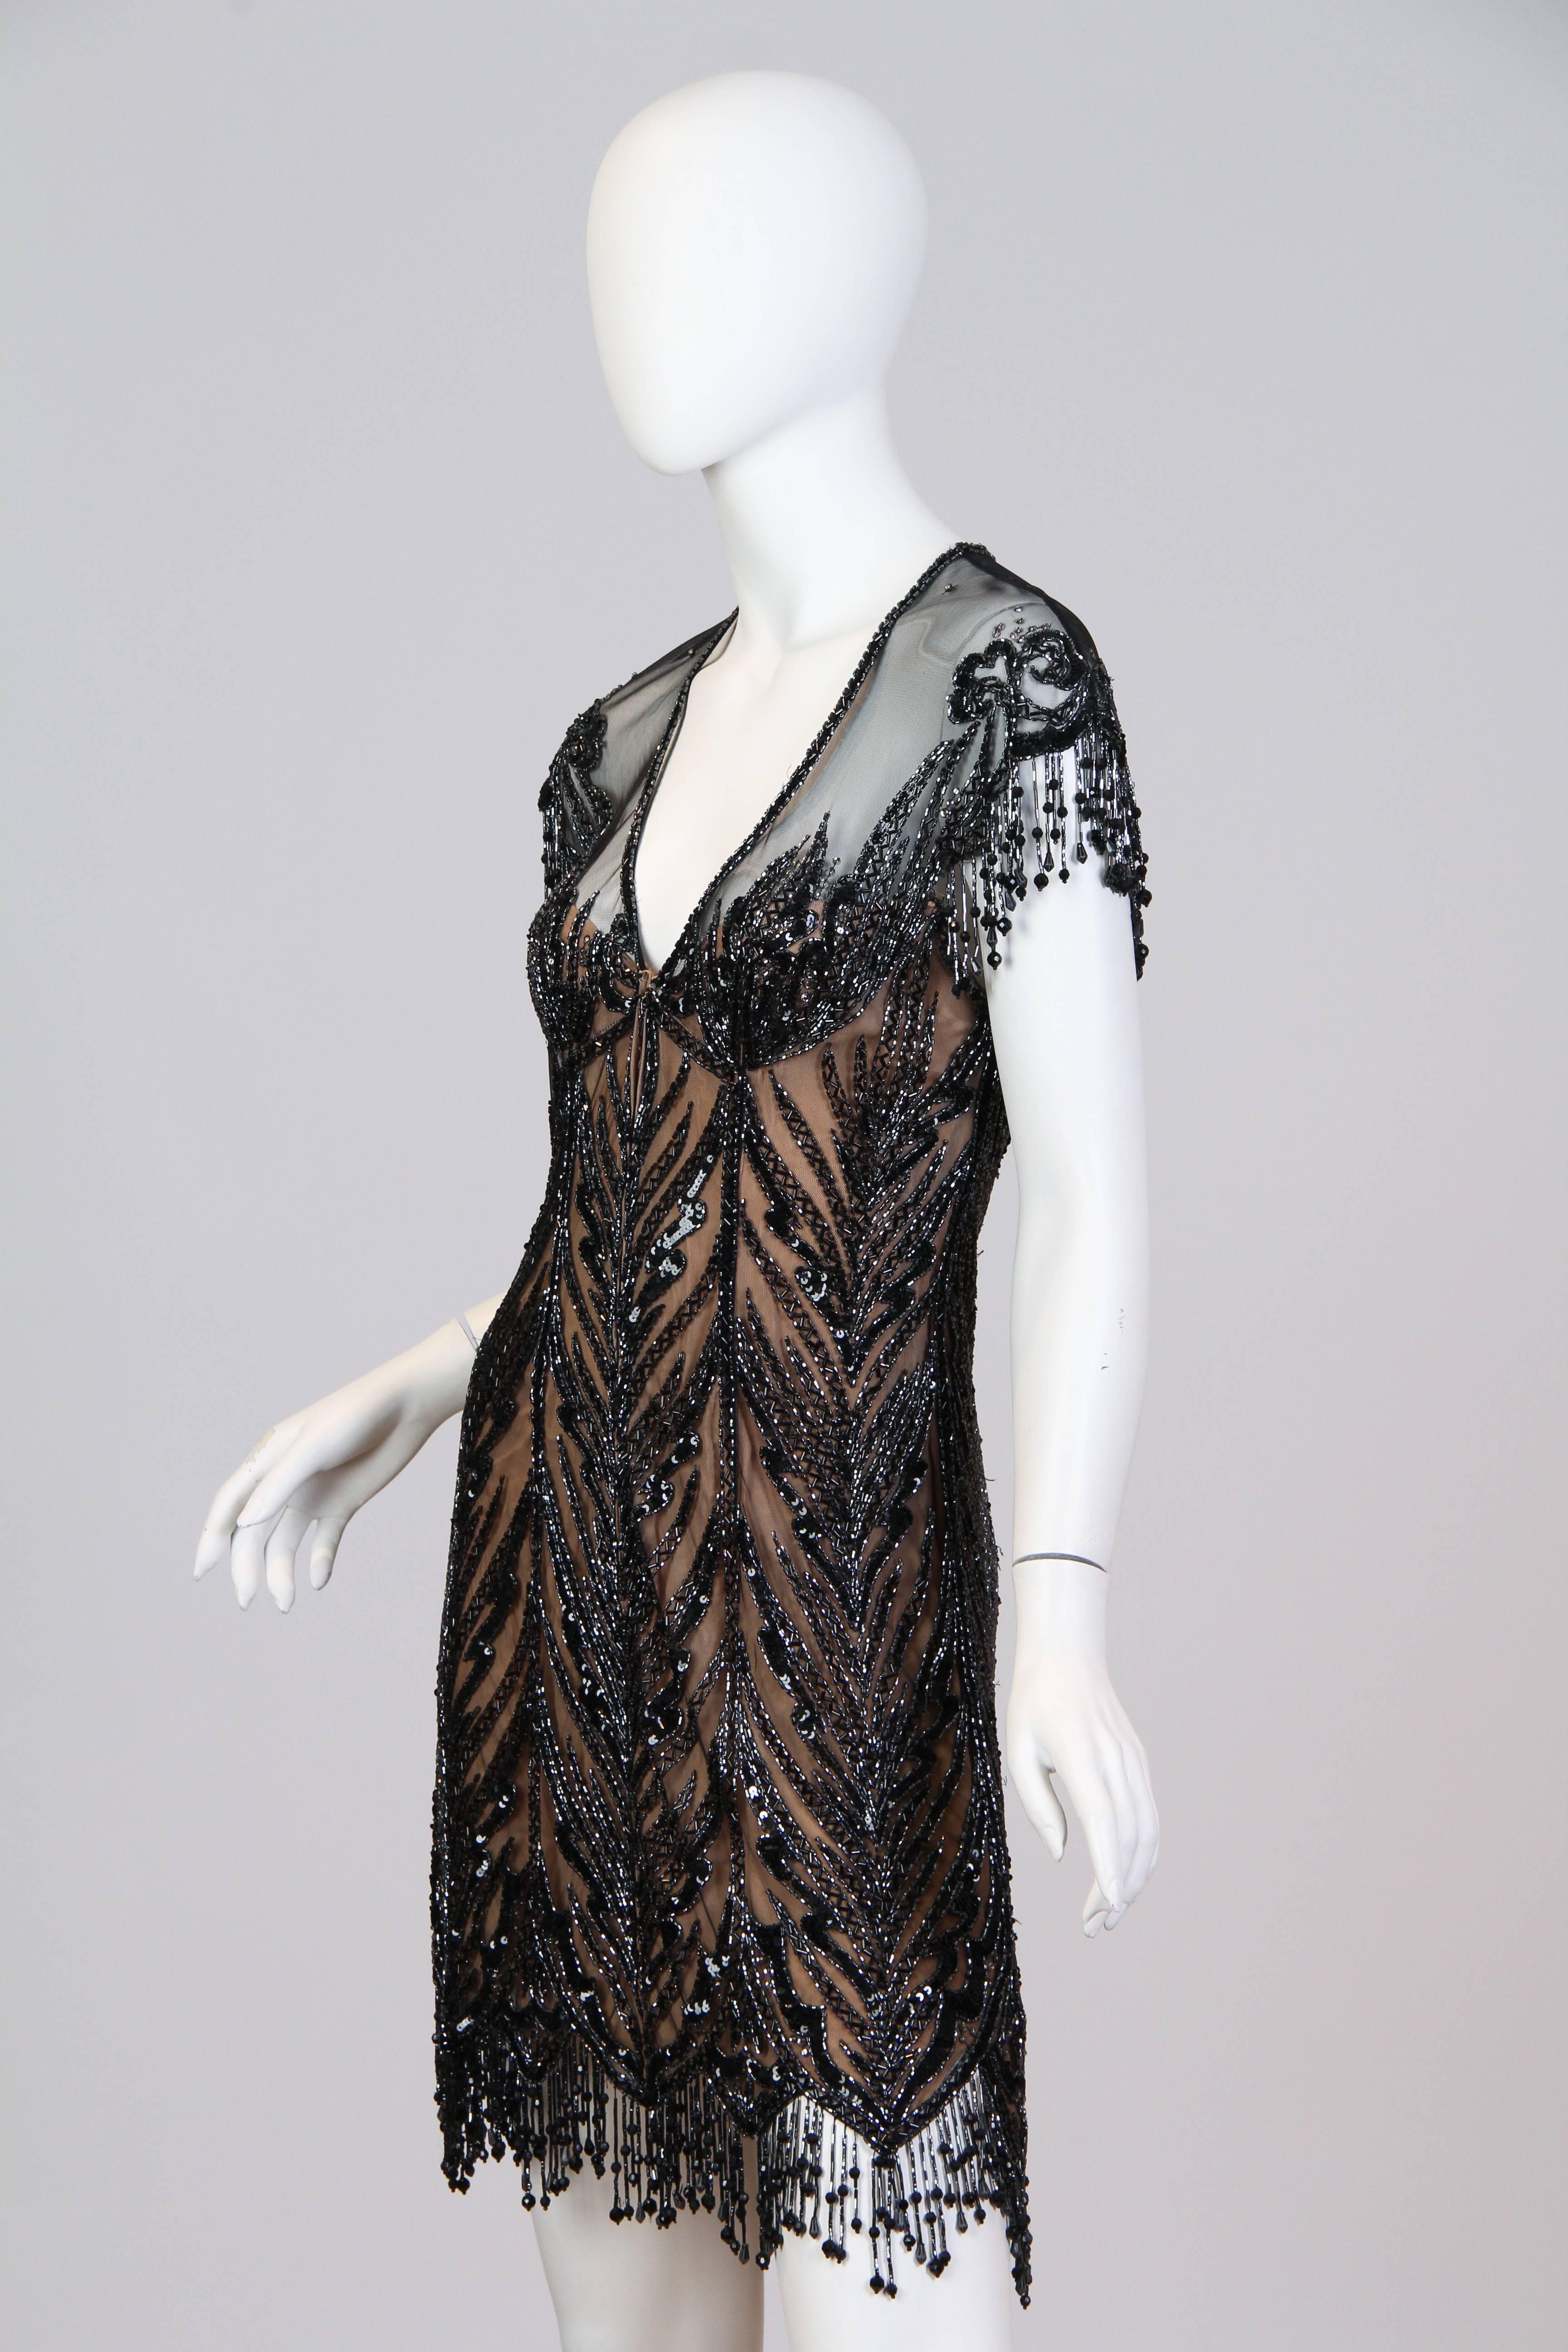 This is a stunning dress by American great Bob Mackie. Made of a sheer black net, it is highly embellished with intricate, sumptuous beadwork, sequins and crystals. With its glittering and shimmering art-nouveau pattern, low V-neck, and swinging